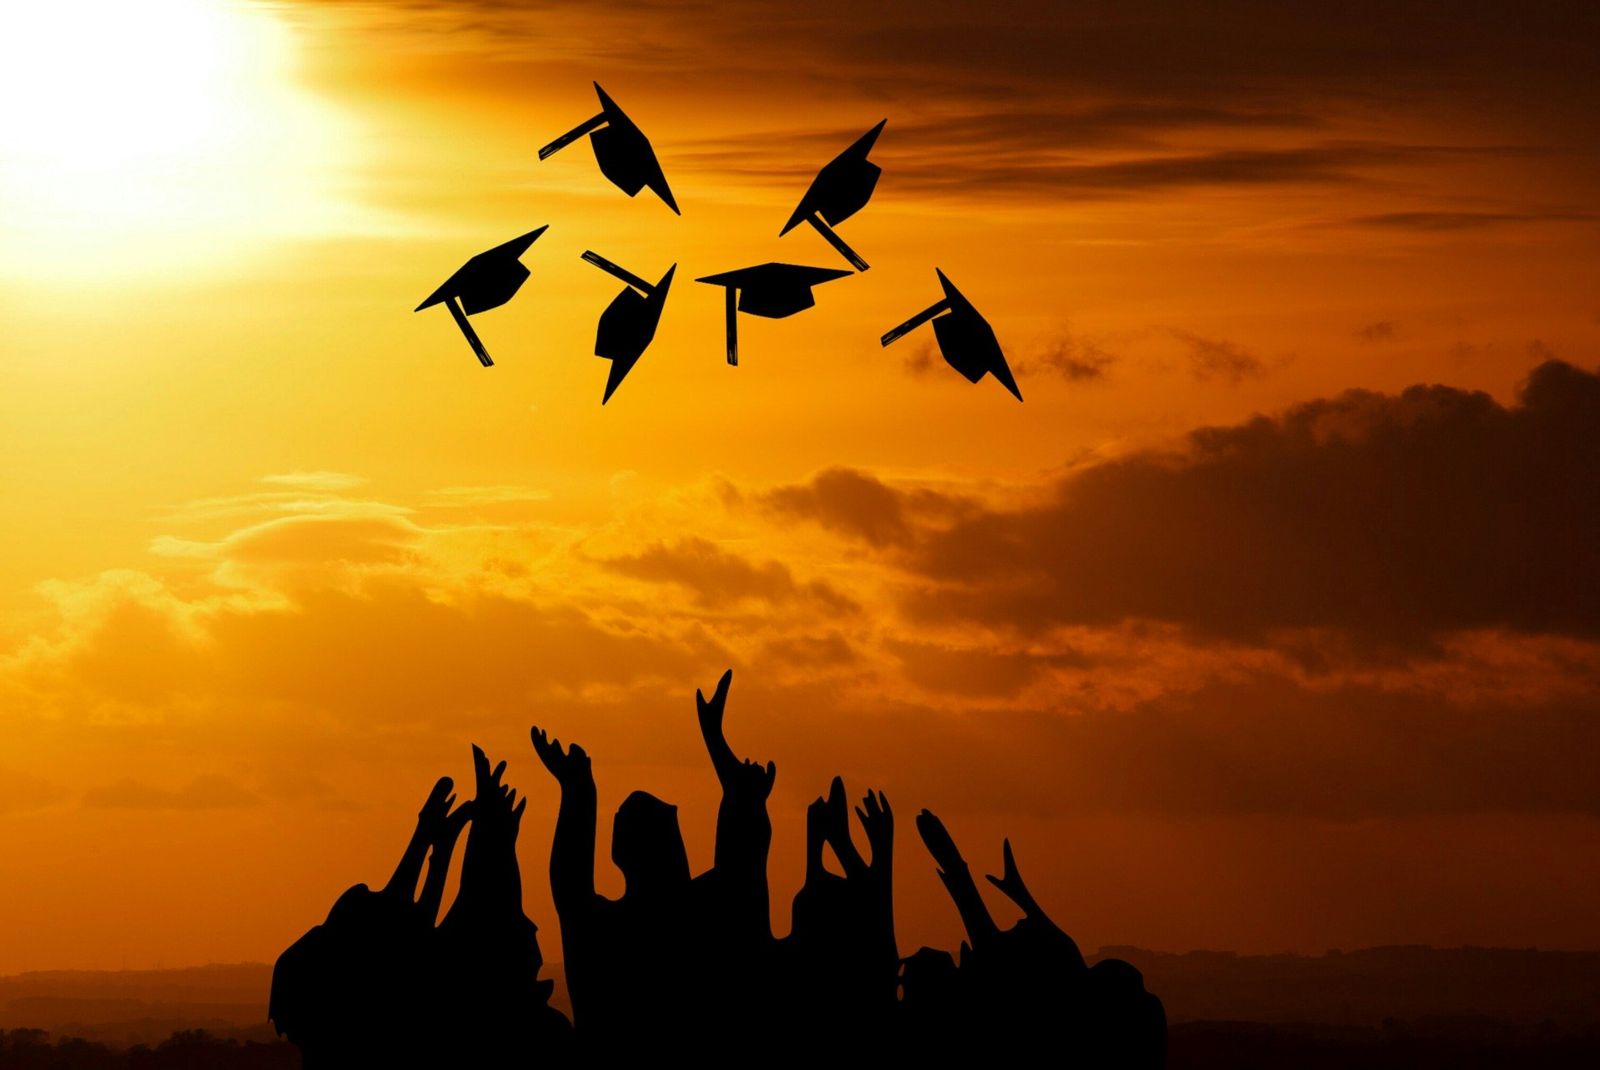 A forest green, hyperlinked, button labeled Diplomas in white, bolded, underlined text with an image of six graduates stand silhouetted in black against a sunrise/sunset with a golden-orange, cloudy sky while throwing their graduation caps in the air.